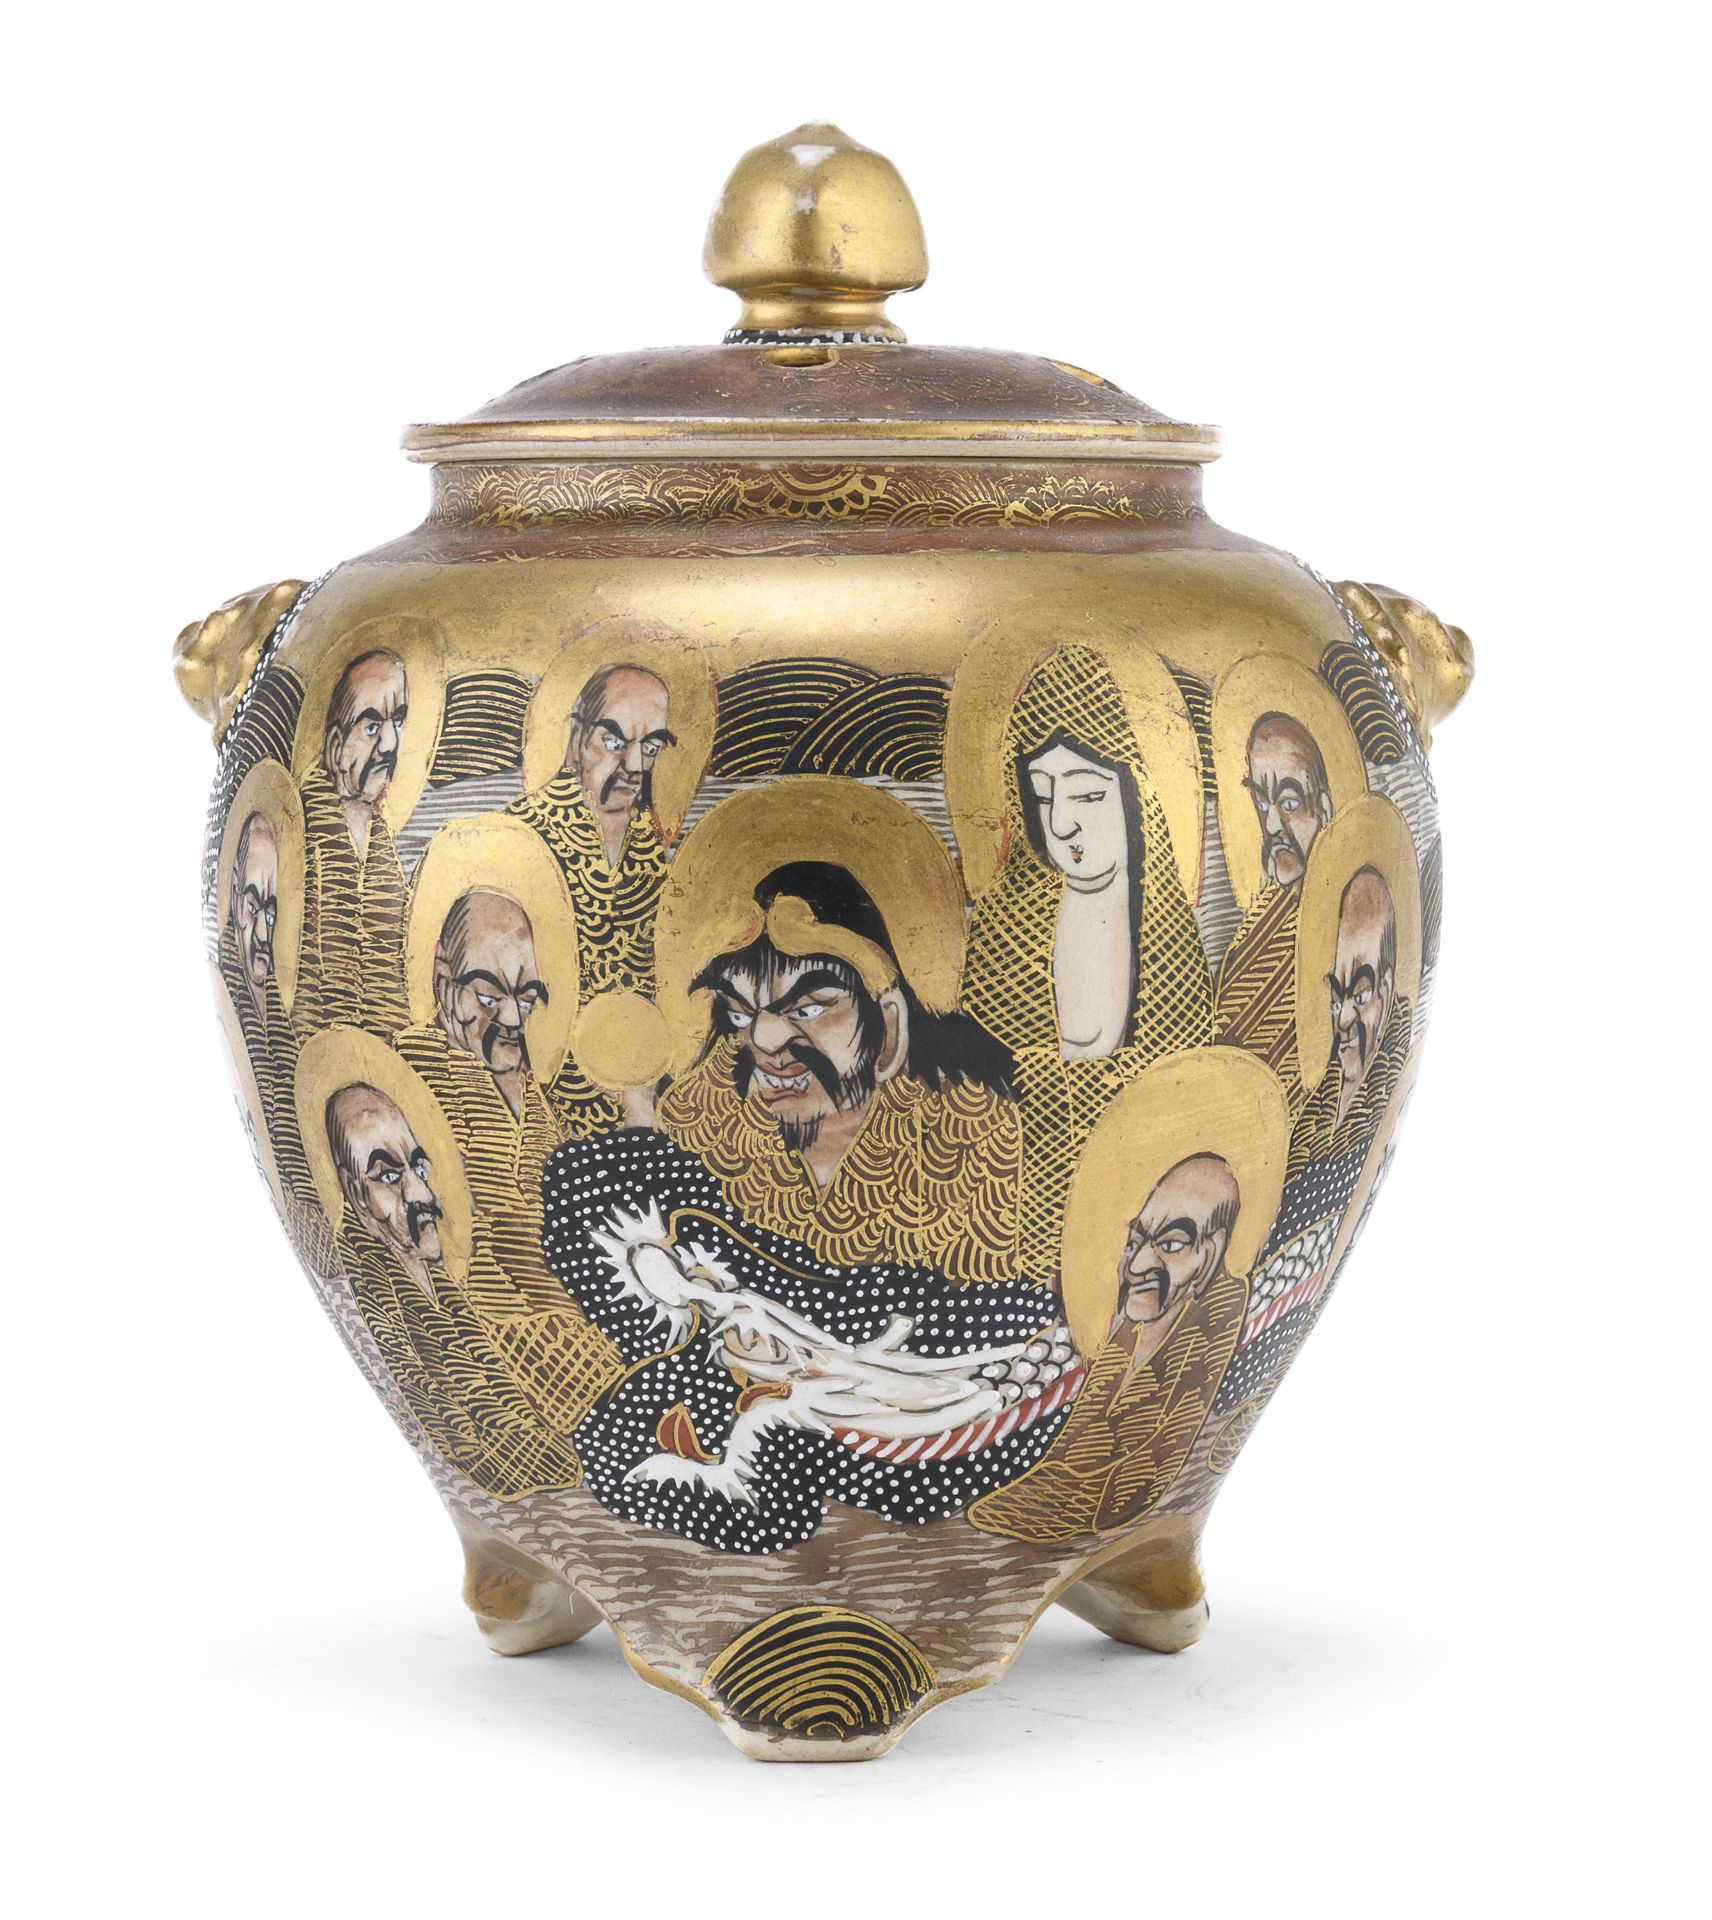 A JAPANESE POLYCHROME AND GOLD ENAMELED SATSUMA CERAMIC CENSER LATE 19TH EARLY 20TH CENTURY.